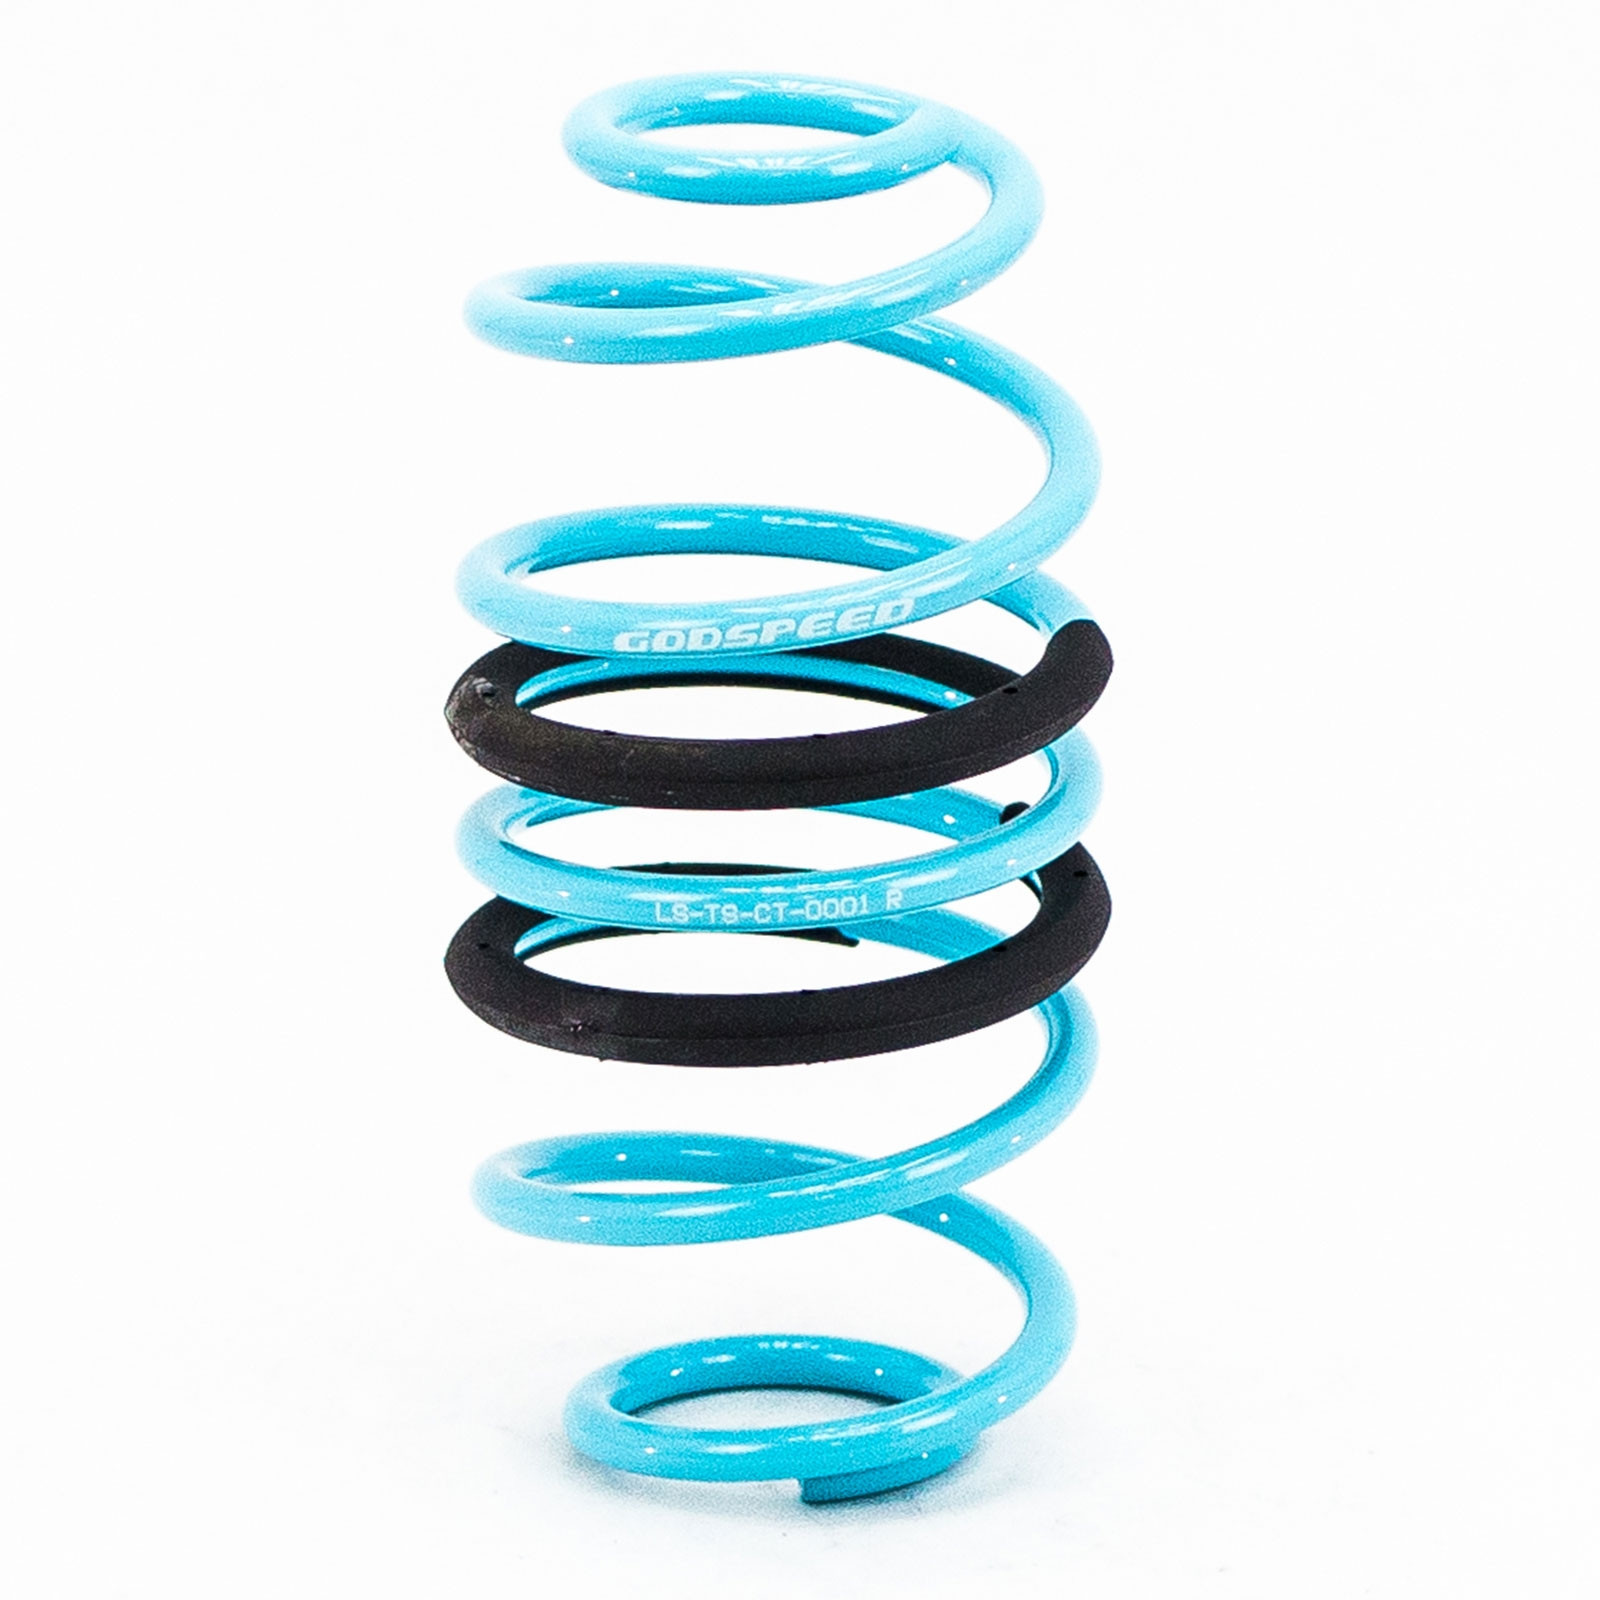 Godspeed Traction-S Performance Lowering Springs Kit For Chevy Sonic 2012-2014